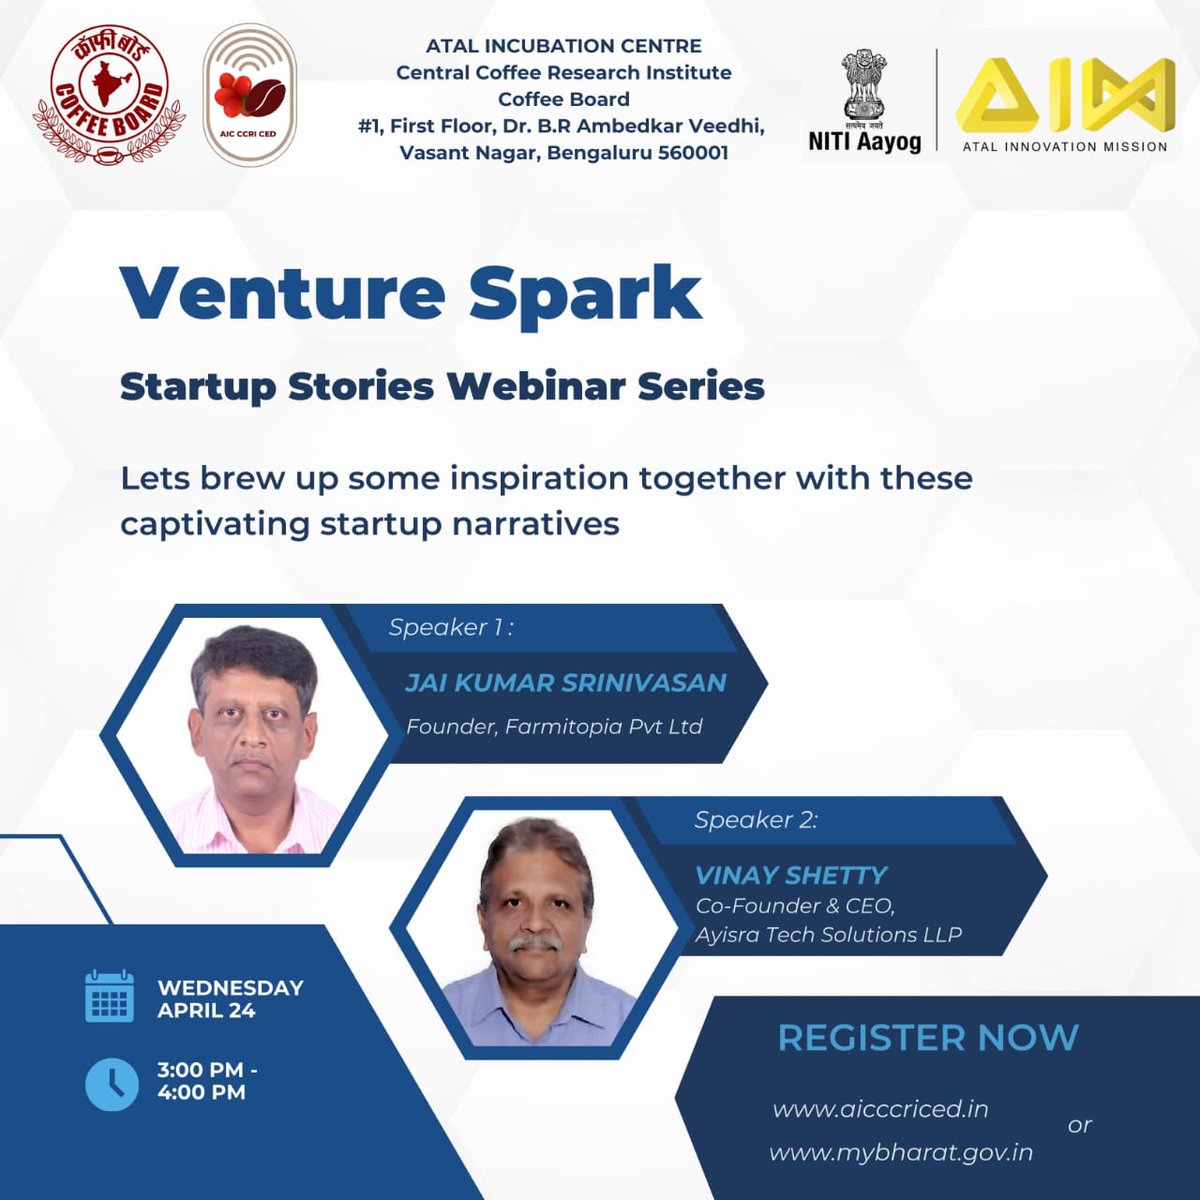 Join the Venture Spark webinar series featuring captivating startup stories in the coffee industry, hosted by AIC-CCRI-CED.  

Meeting link:
coffeeboard.webex.com/coffeeboard/j.…

Meeting number:
2515 367 0966

Meeting password:
vMSk3BVng83

 #venturespark #startupstories #entrepreneurship